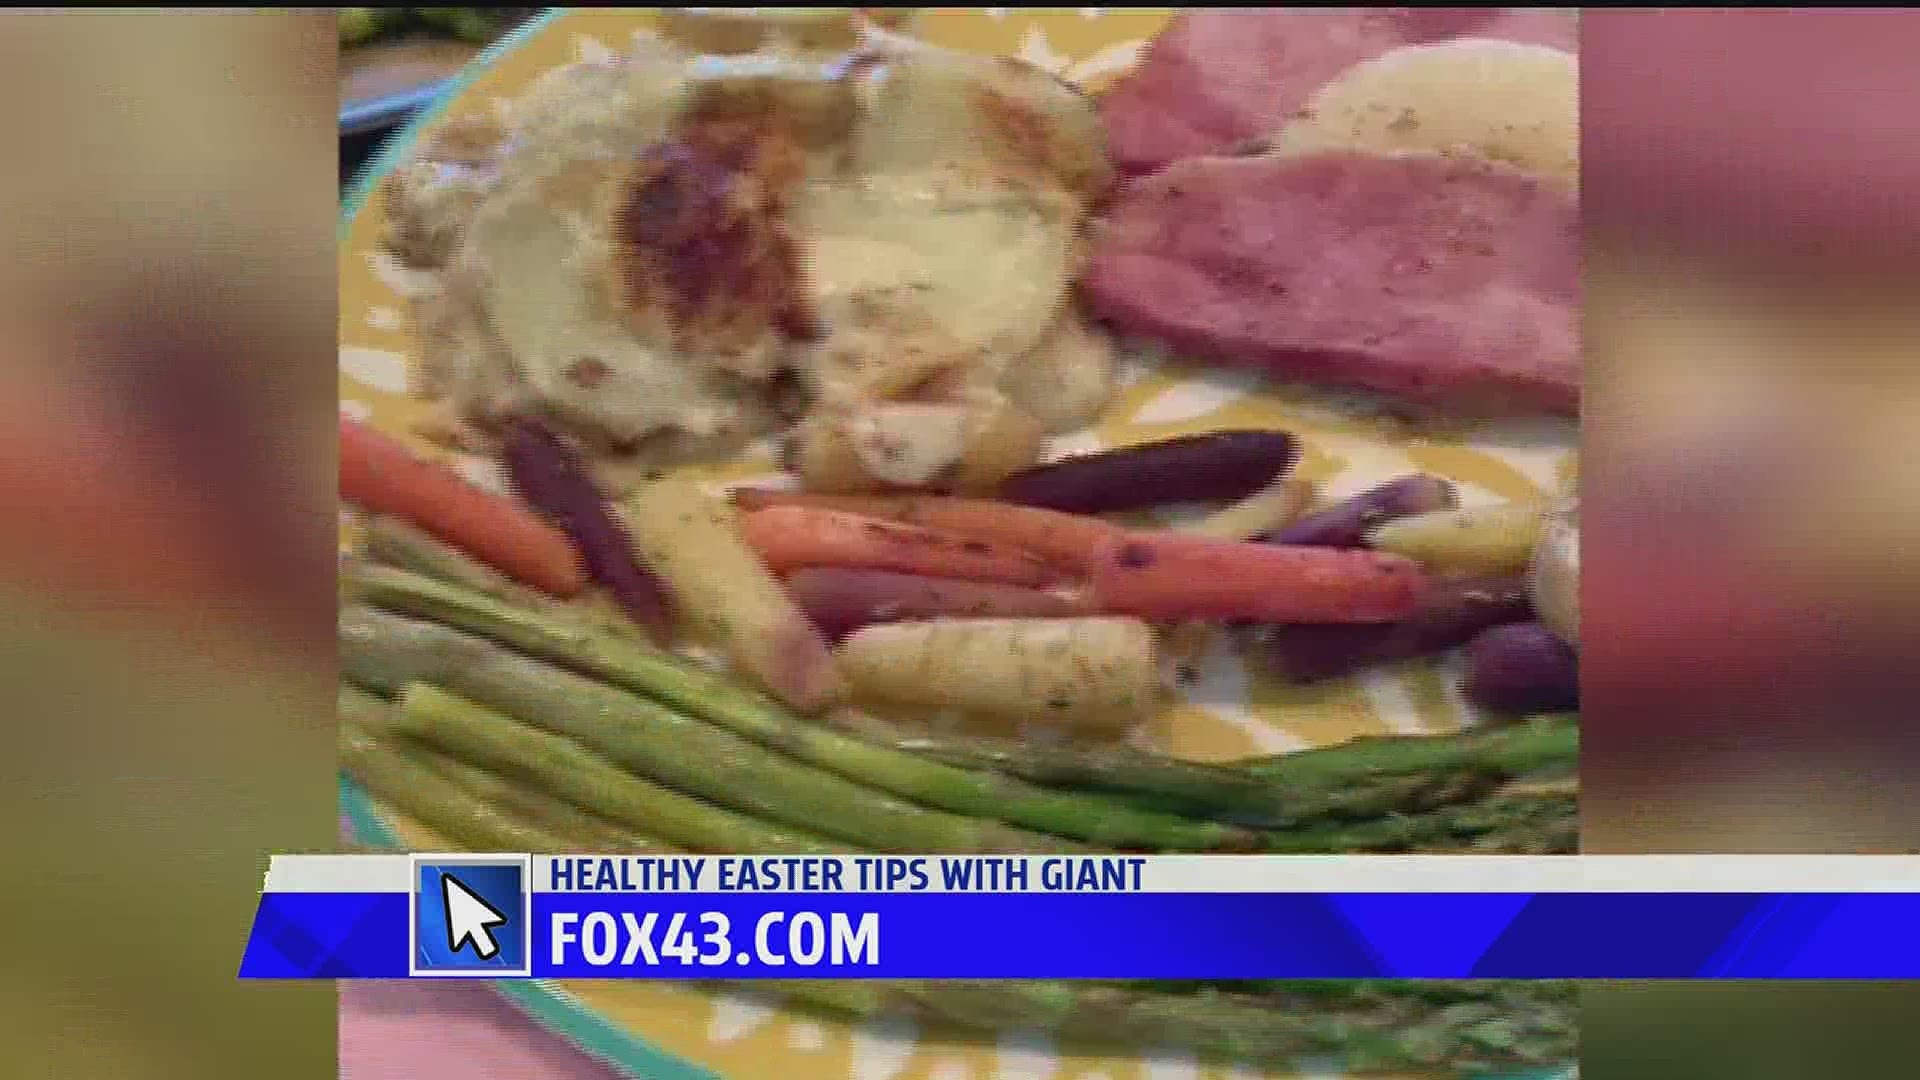 Healthy Easter Tips with Giant. Keeping your family happy and healthy this weekend with easter